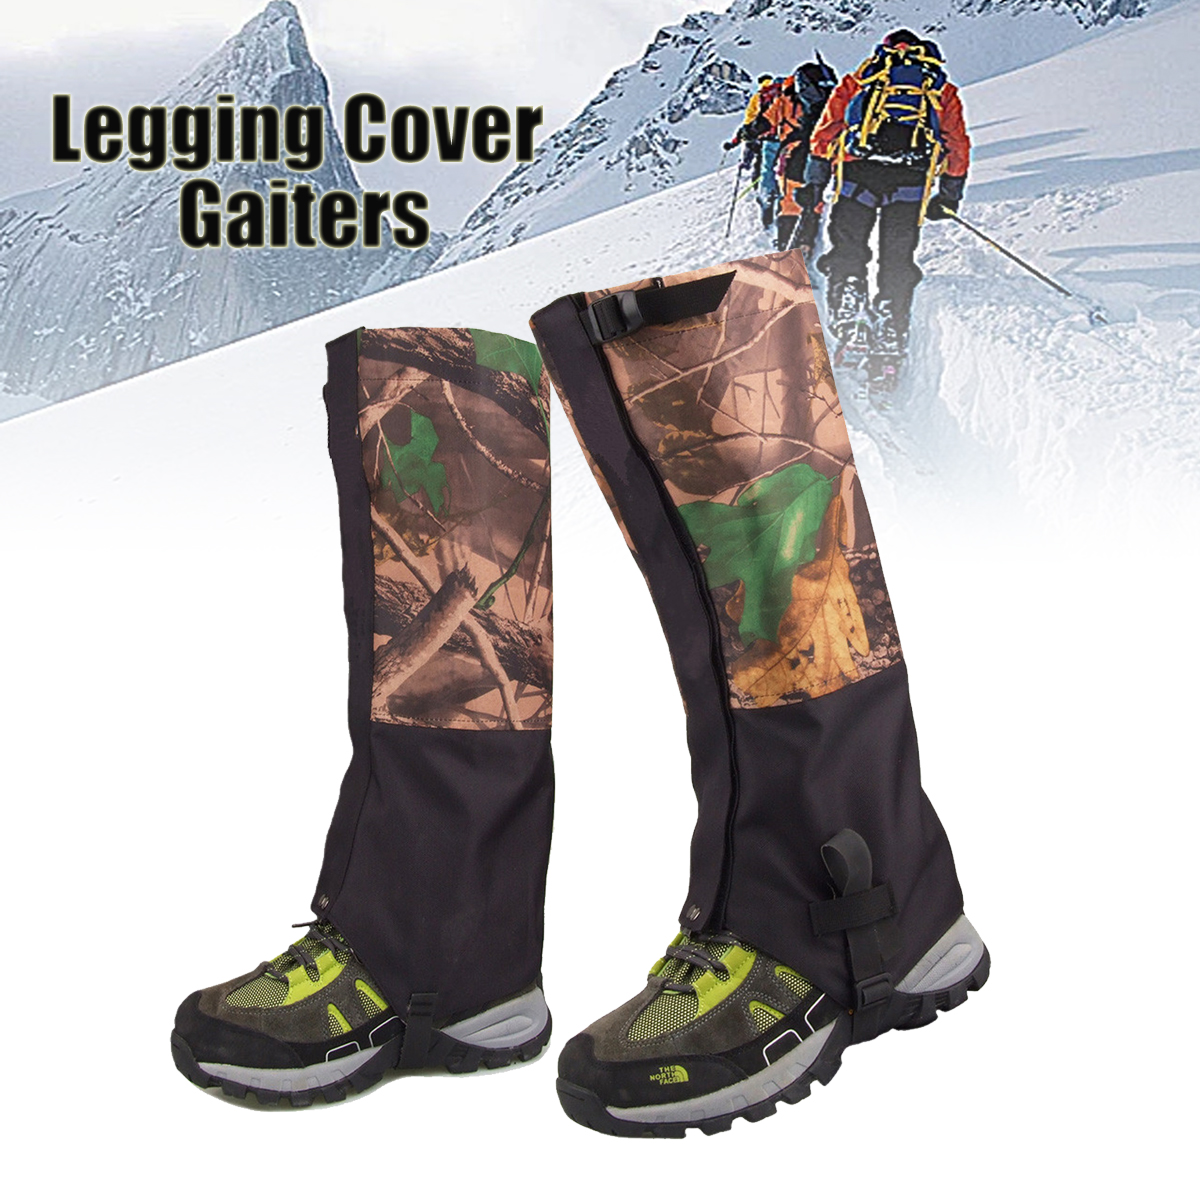 

1 Pair Camouflage Waterproof Outdoor Climbing Hiking Snow Gaiters Leg Cover Boot Legging Wrap